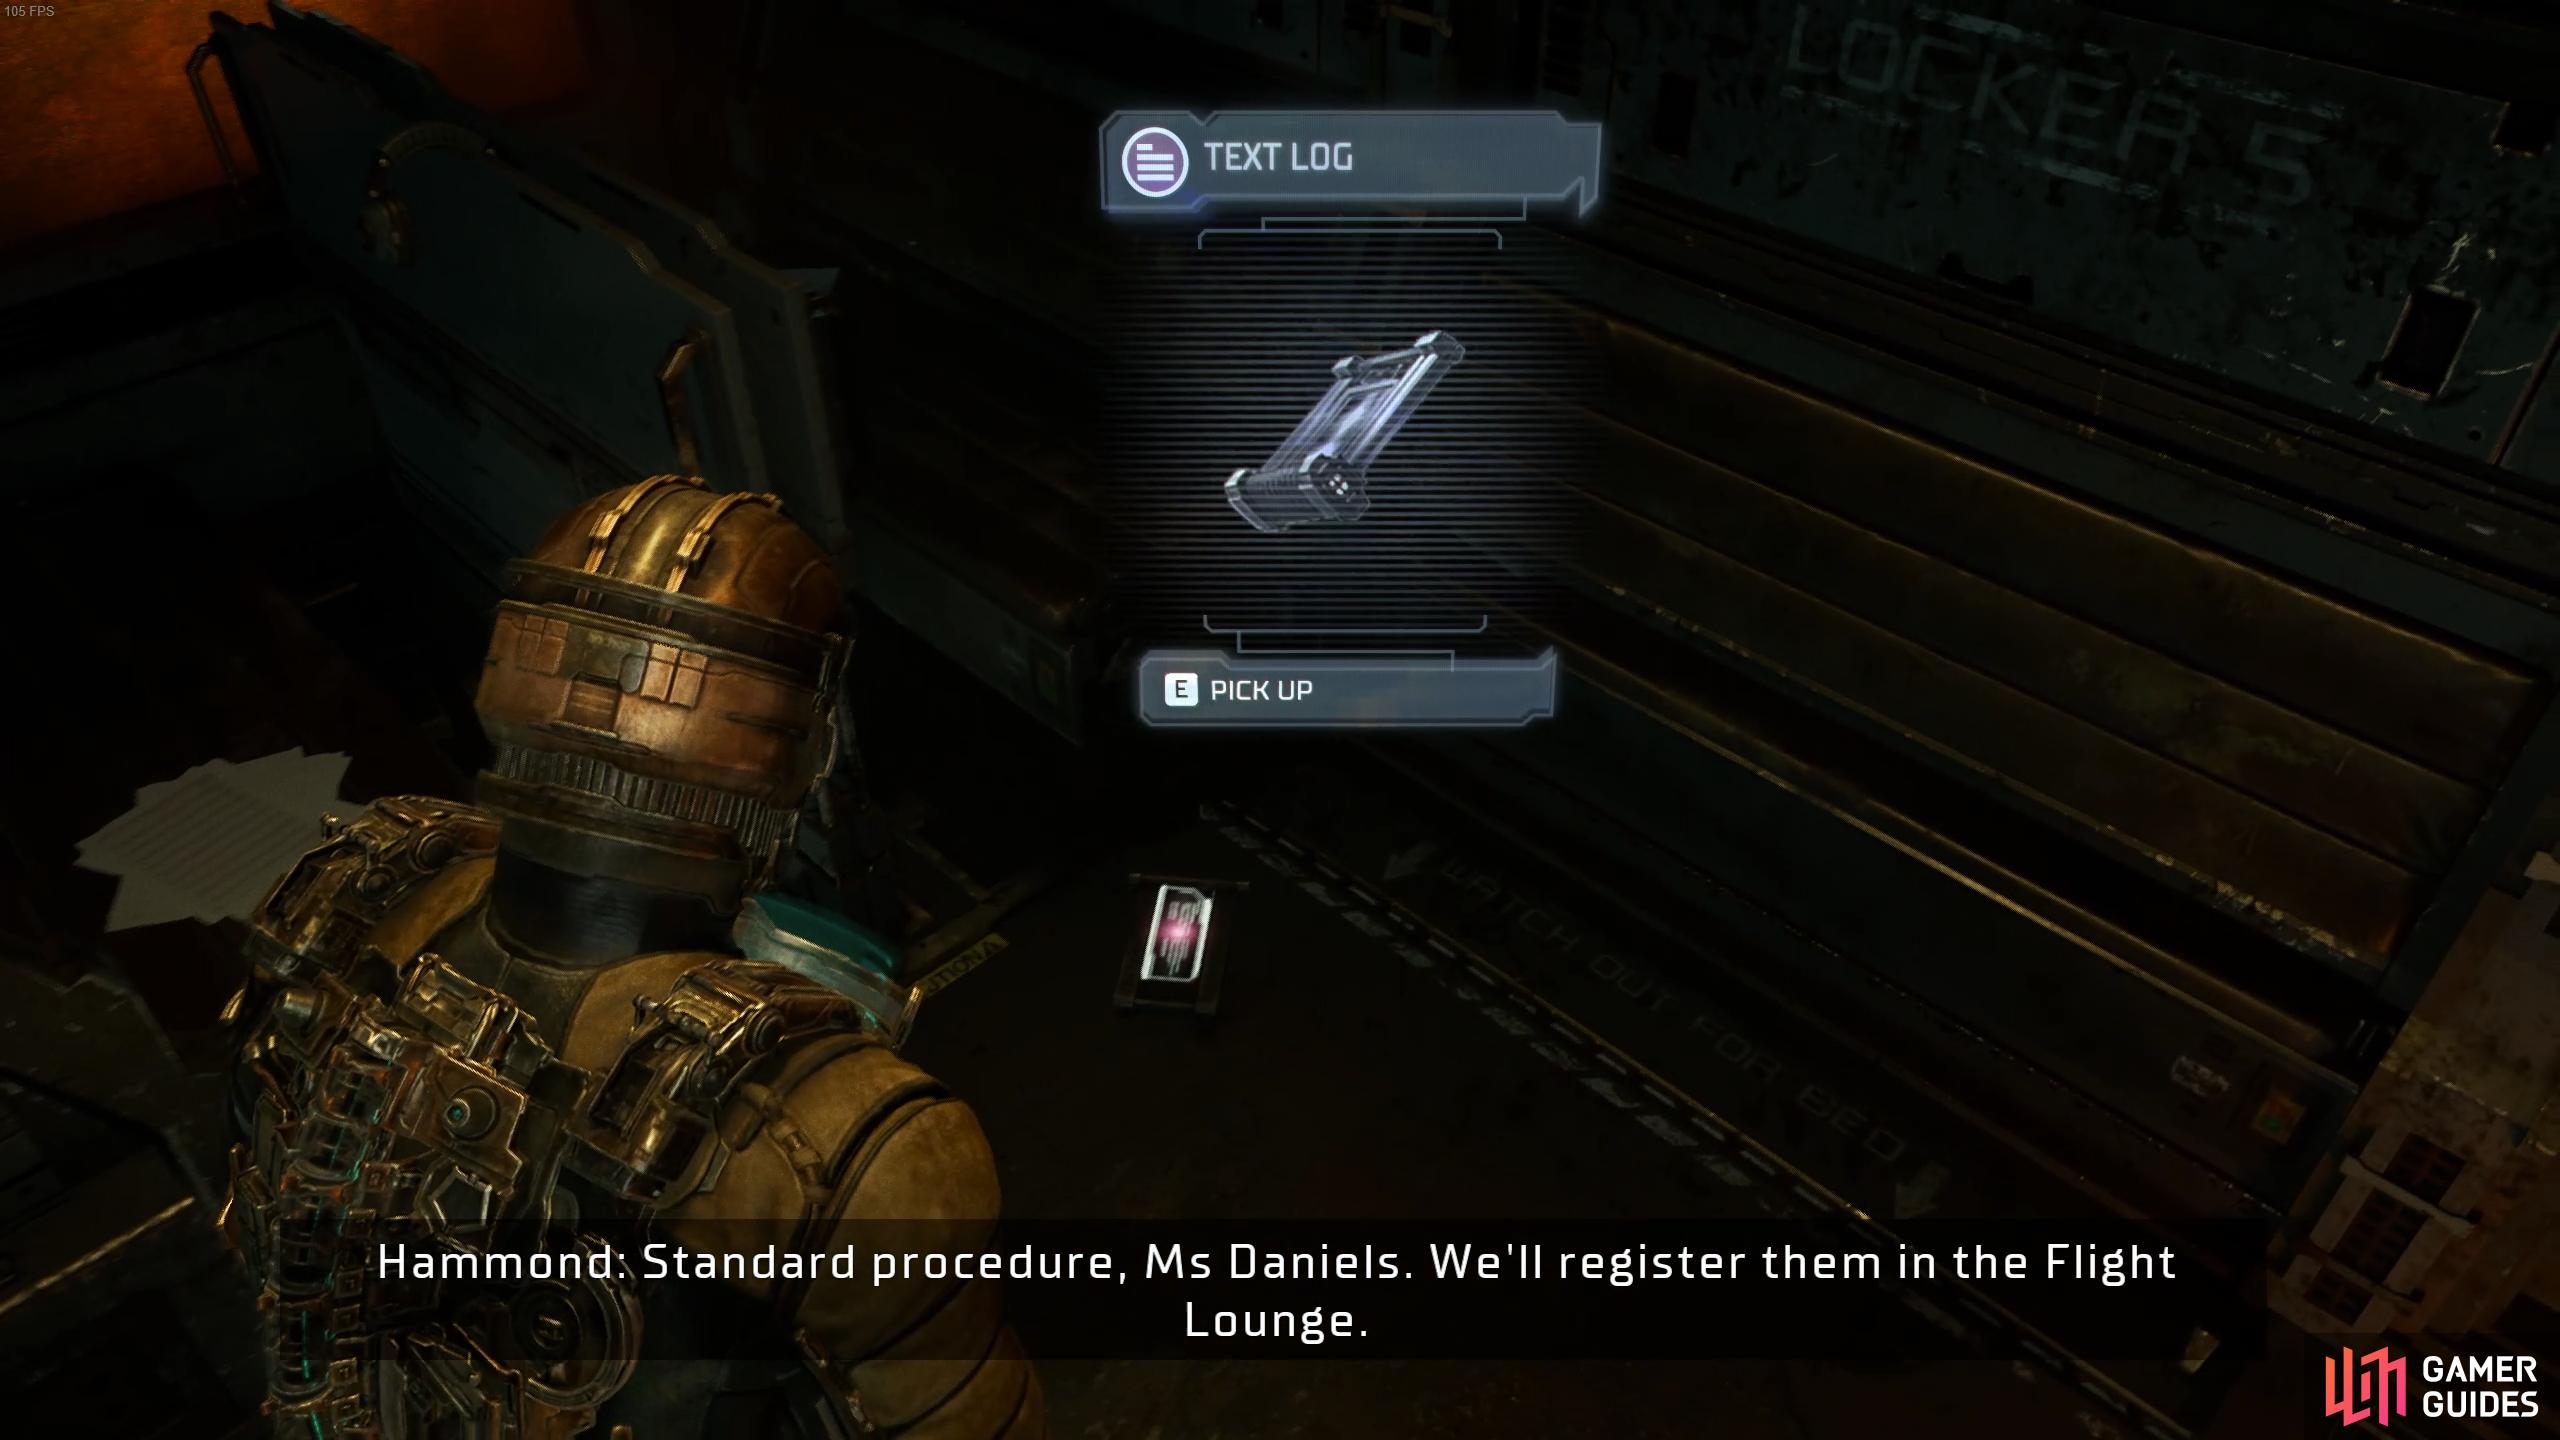 You’ll find the Background Request log inside the USG Kellion ship, where you start the chapter.